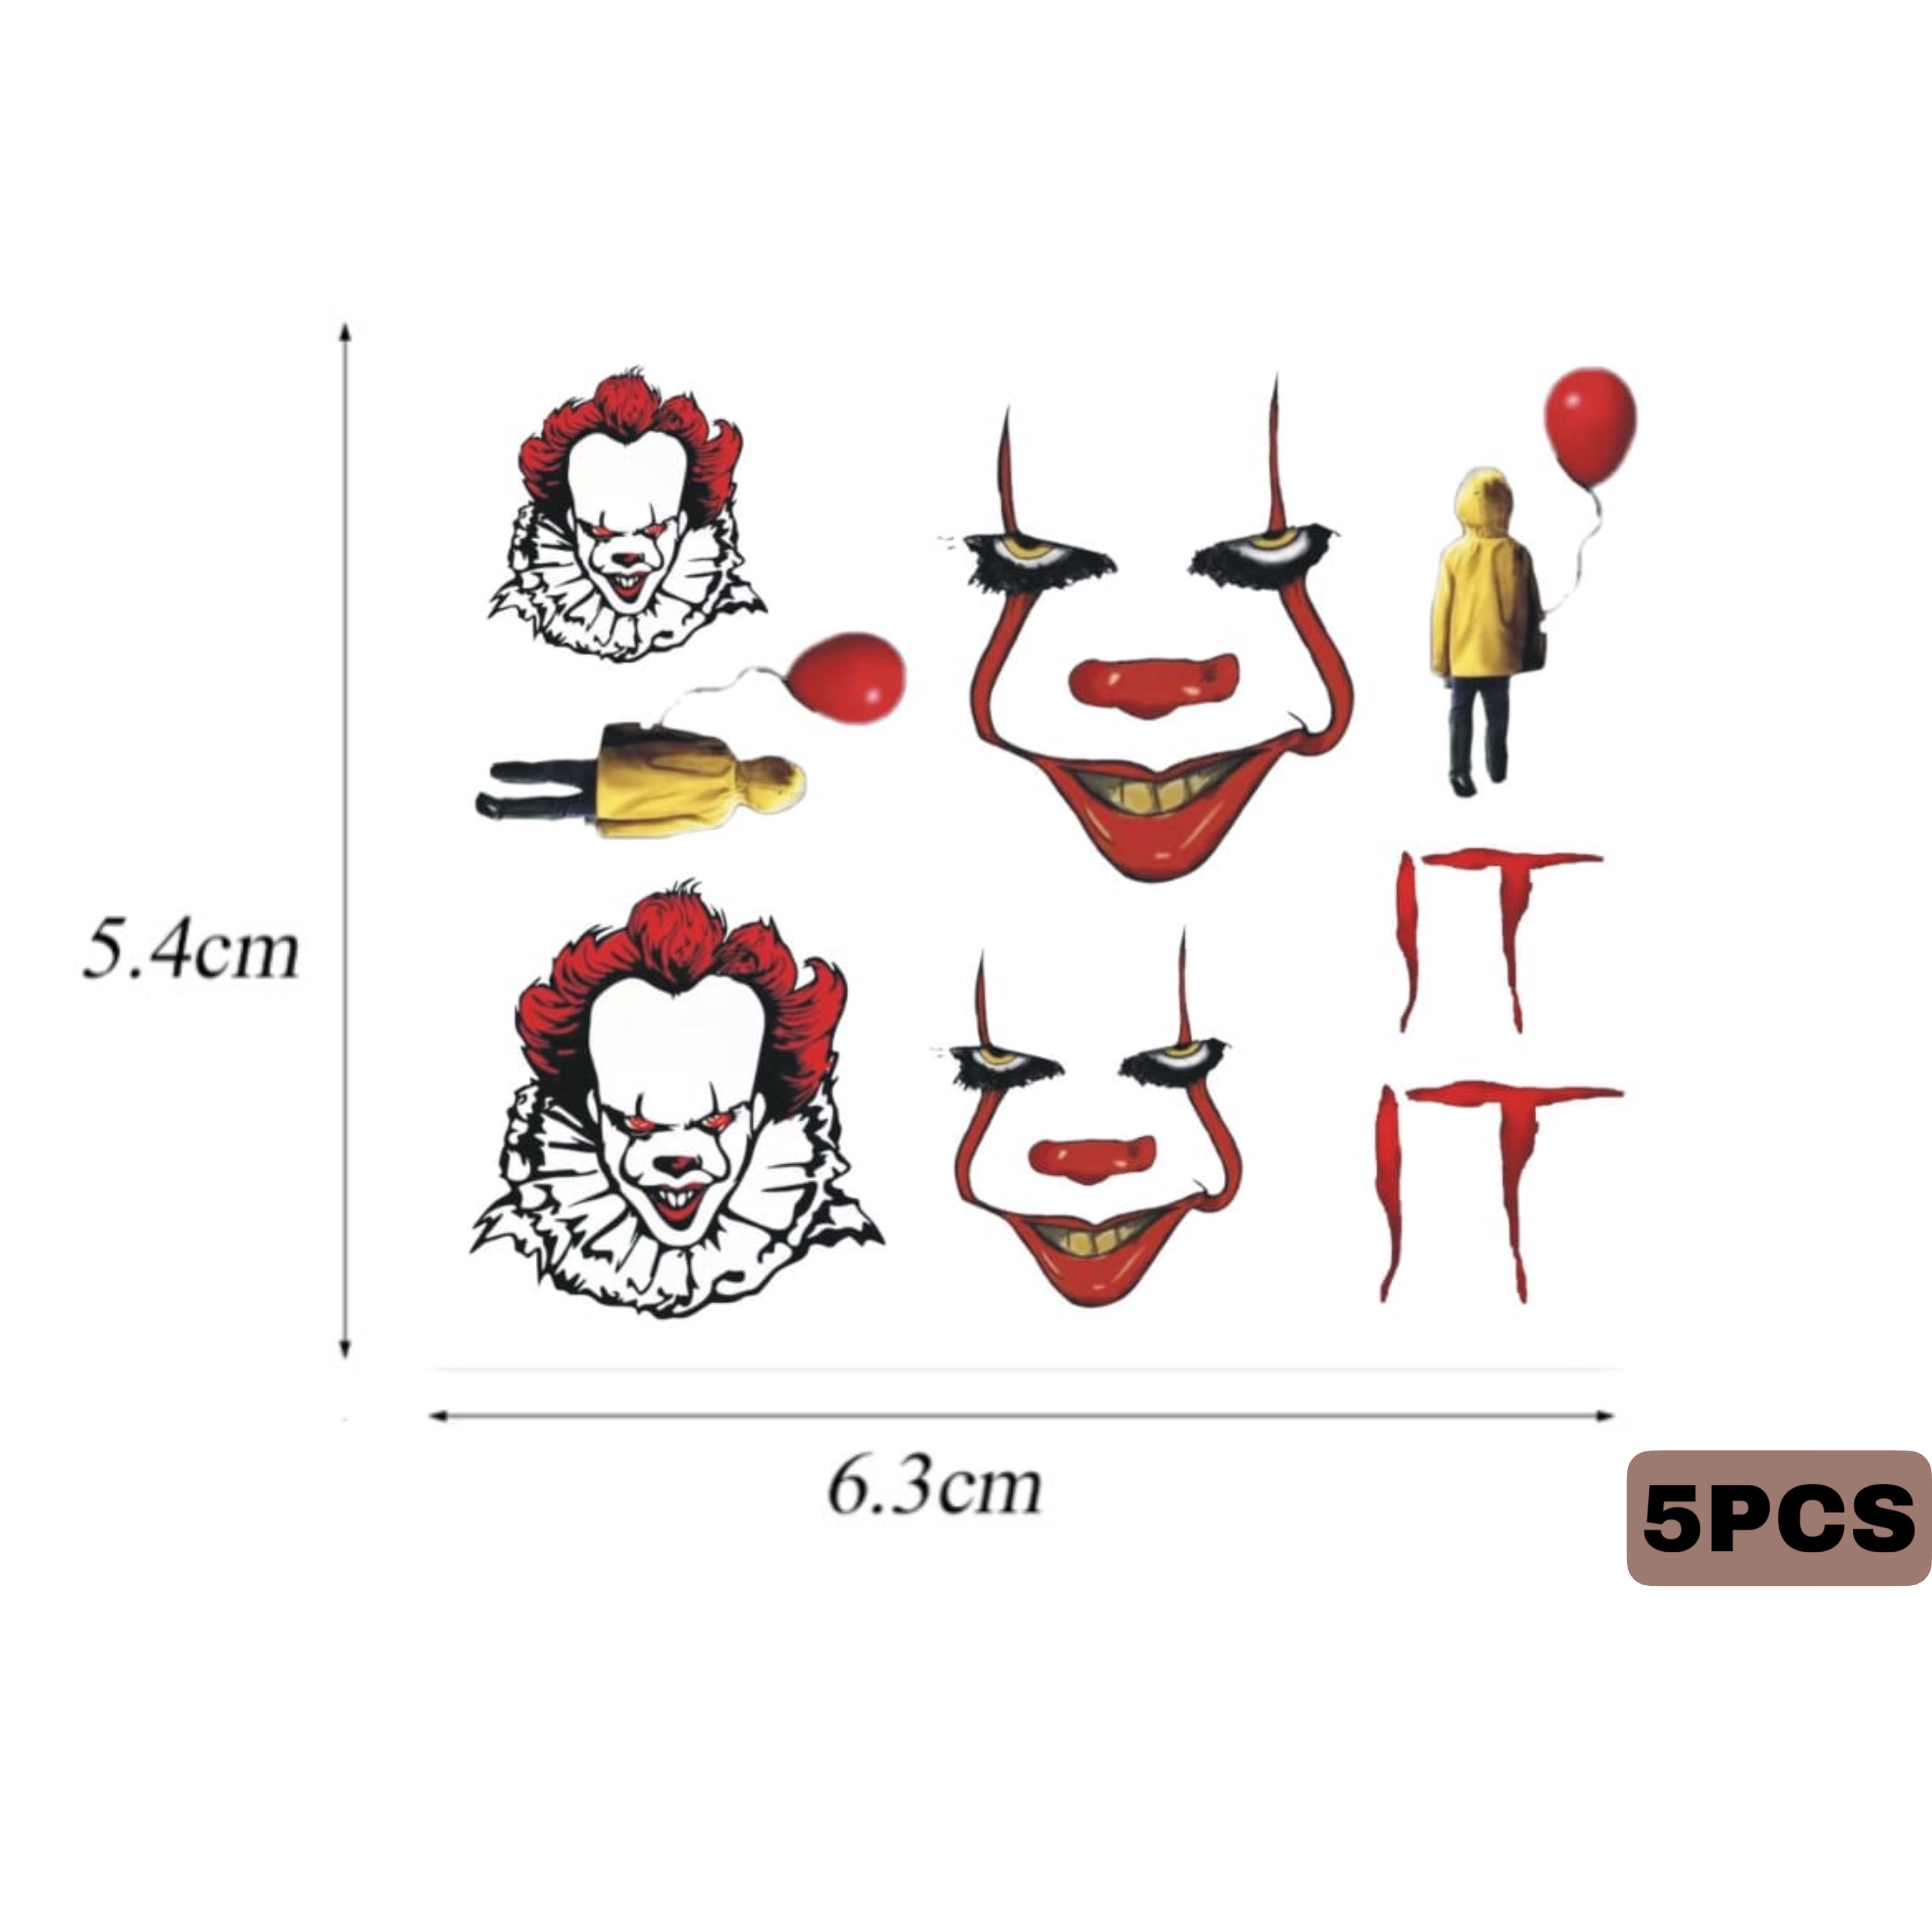 5 pcs "It" Water Decals 2